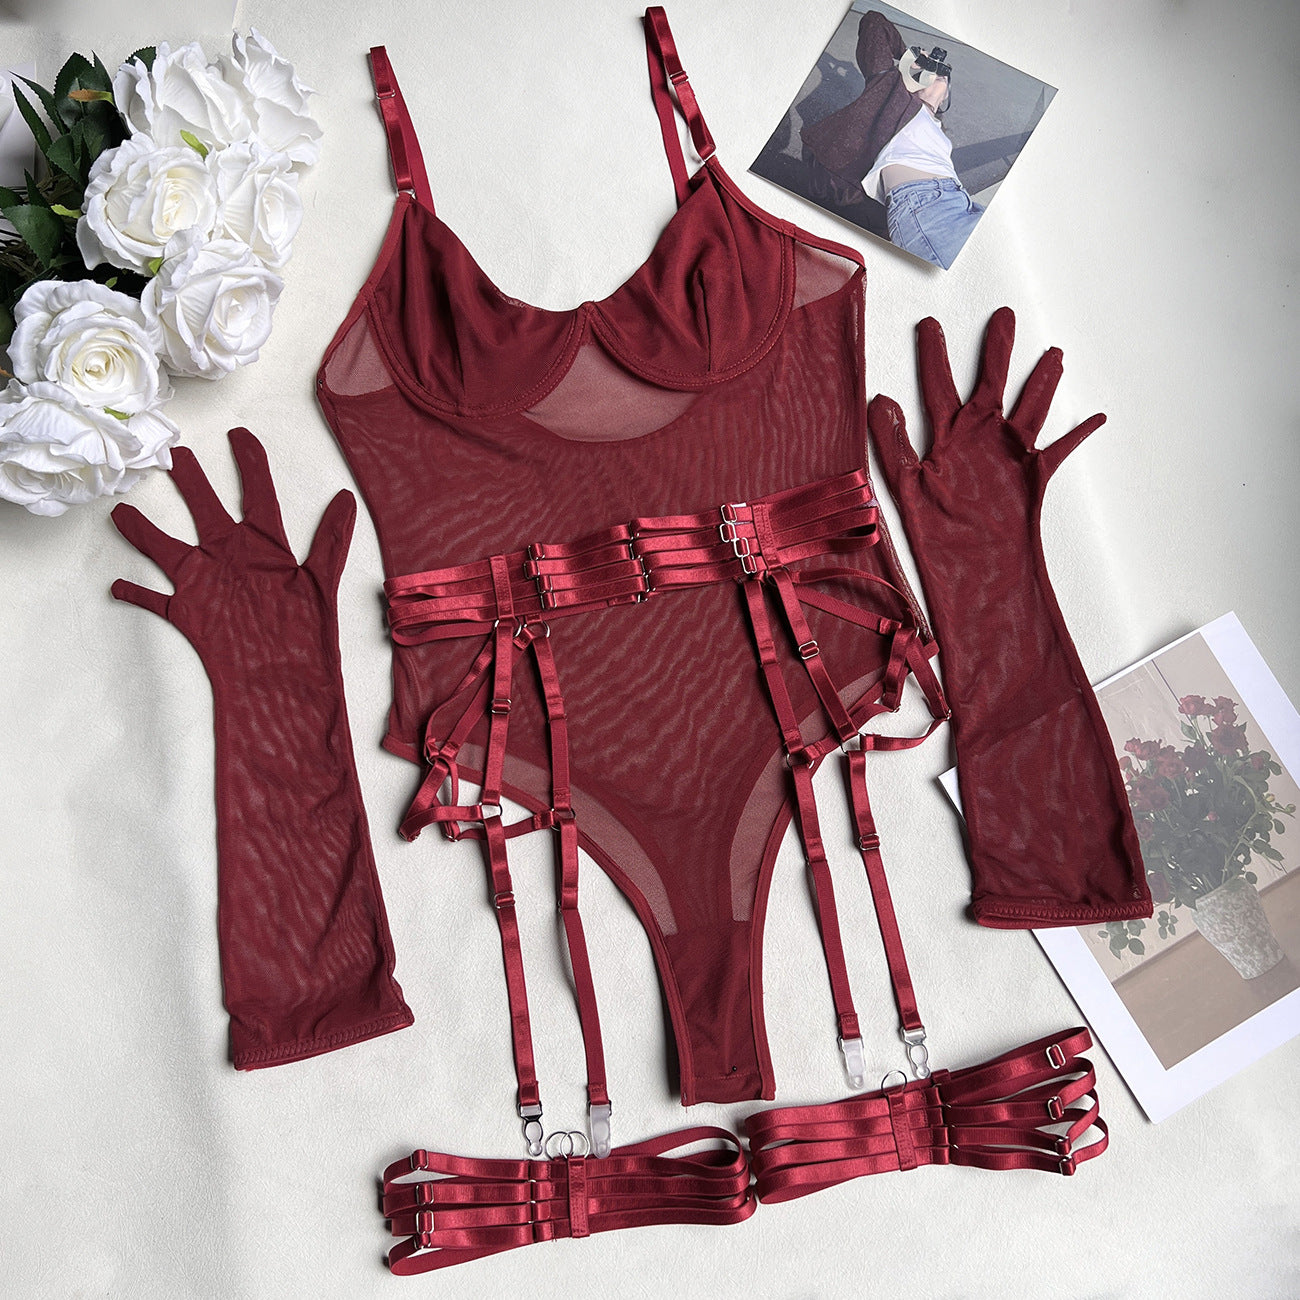 Delicate Mesh Elegance Teddy Set with Gloves and Lustrous Suspender Accents